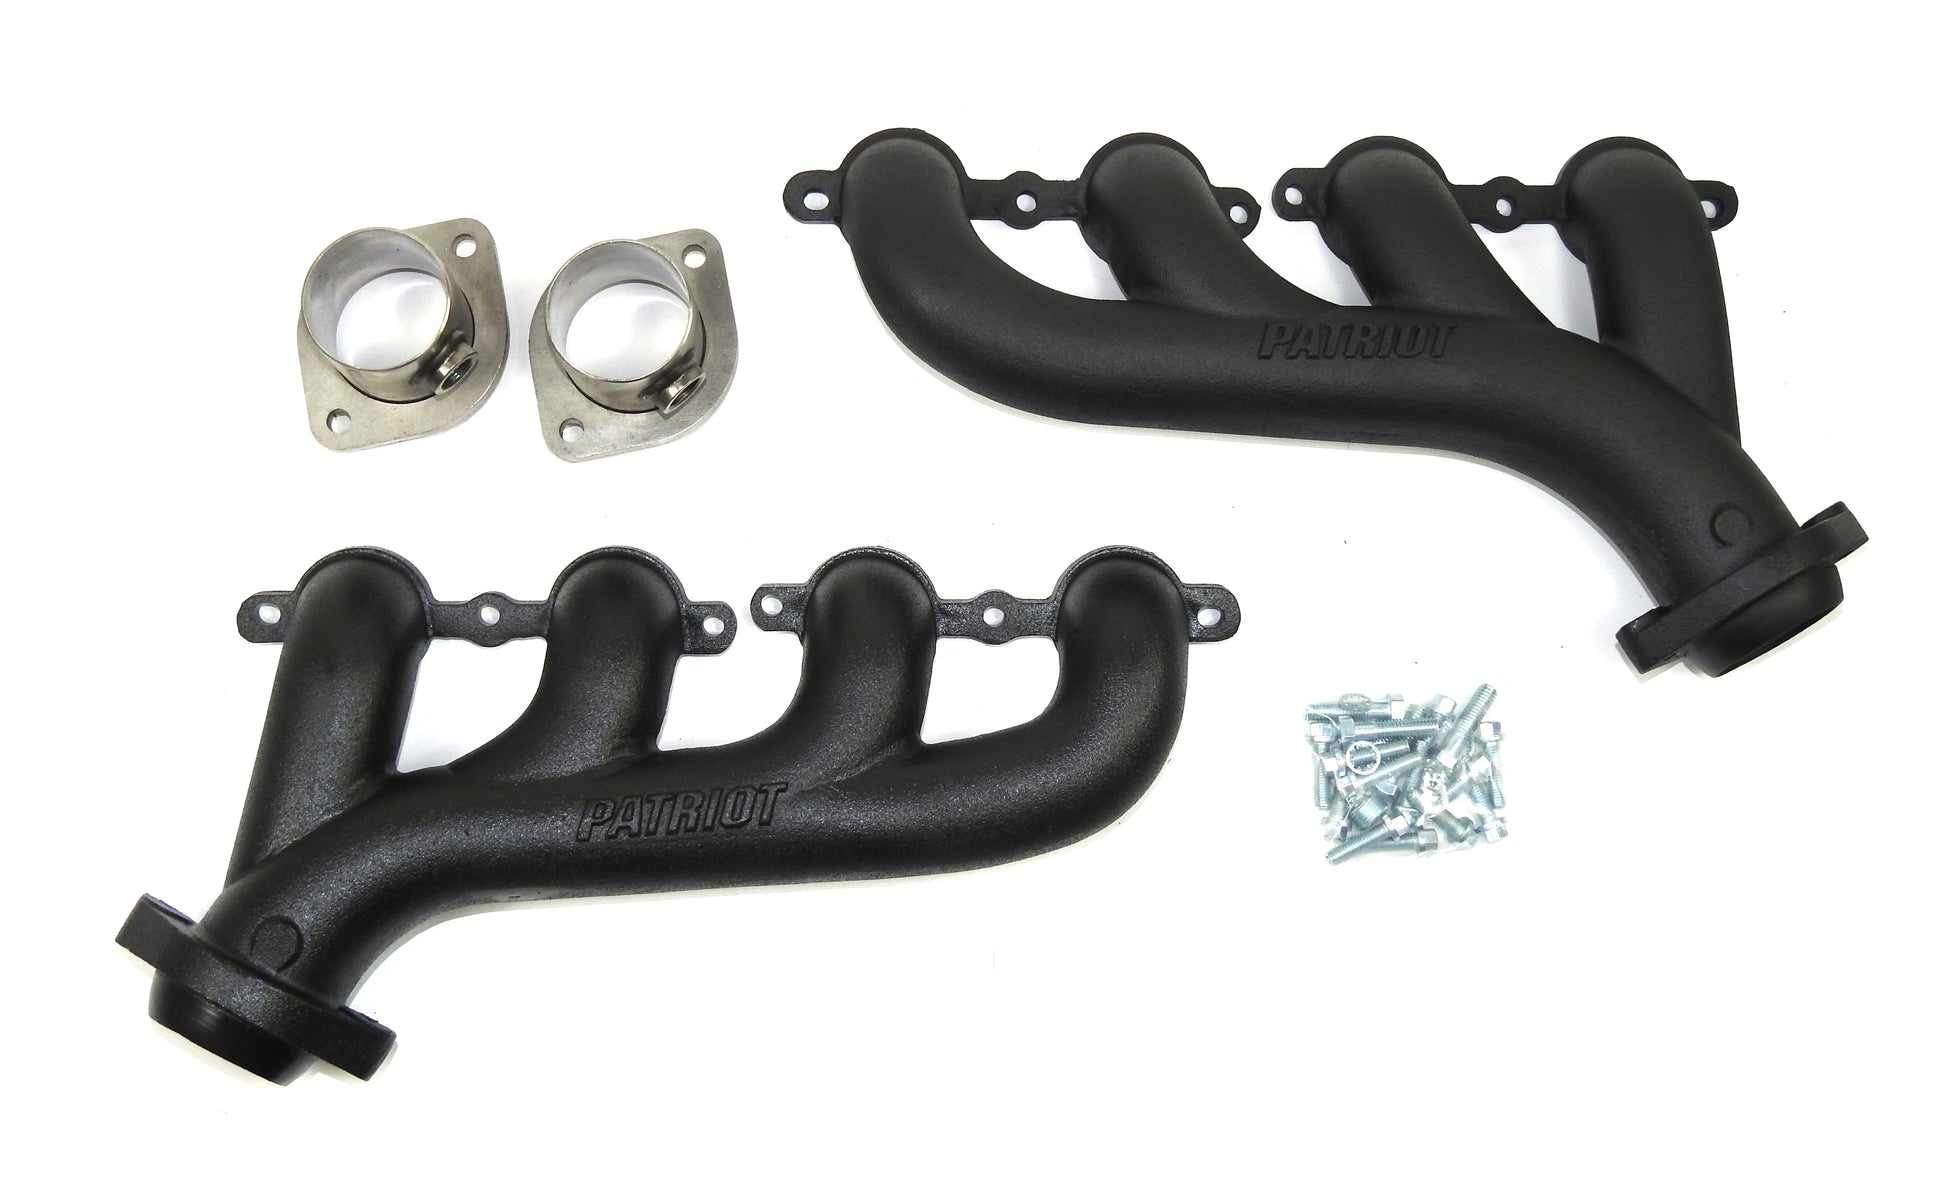 Patriot Headers H8097-B 1 5/8" Cast Tubular Manifolds for GM LS Engines (except LS7 and LS9) for Engine Swap applications and validated fitment on 70-81 GM F-Bodies, 82-88 GM G-Bodies and 68-72 GM A-Bodies Hi-Temp Black Coating